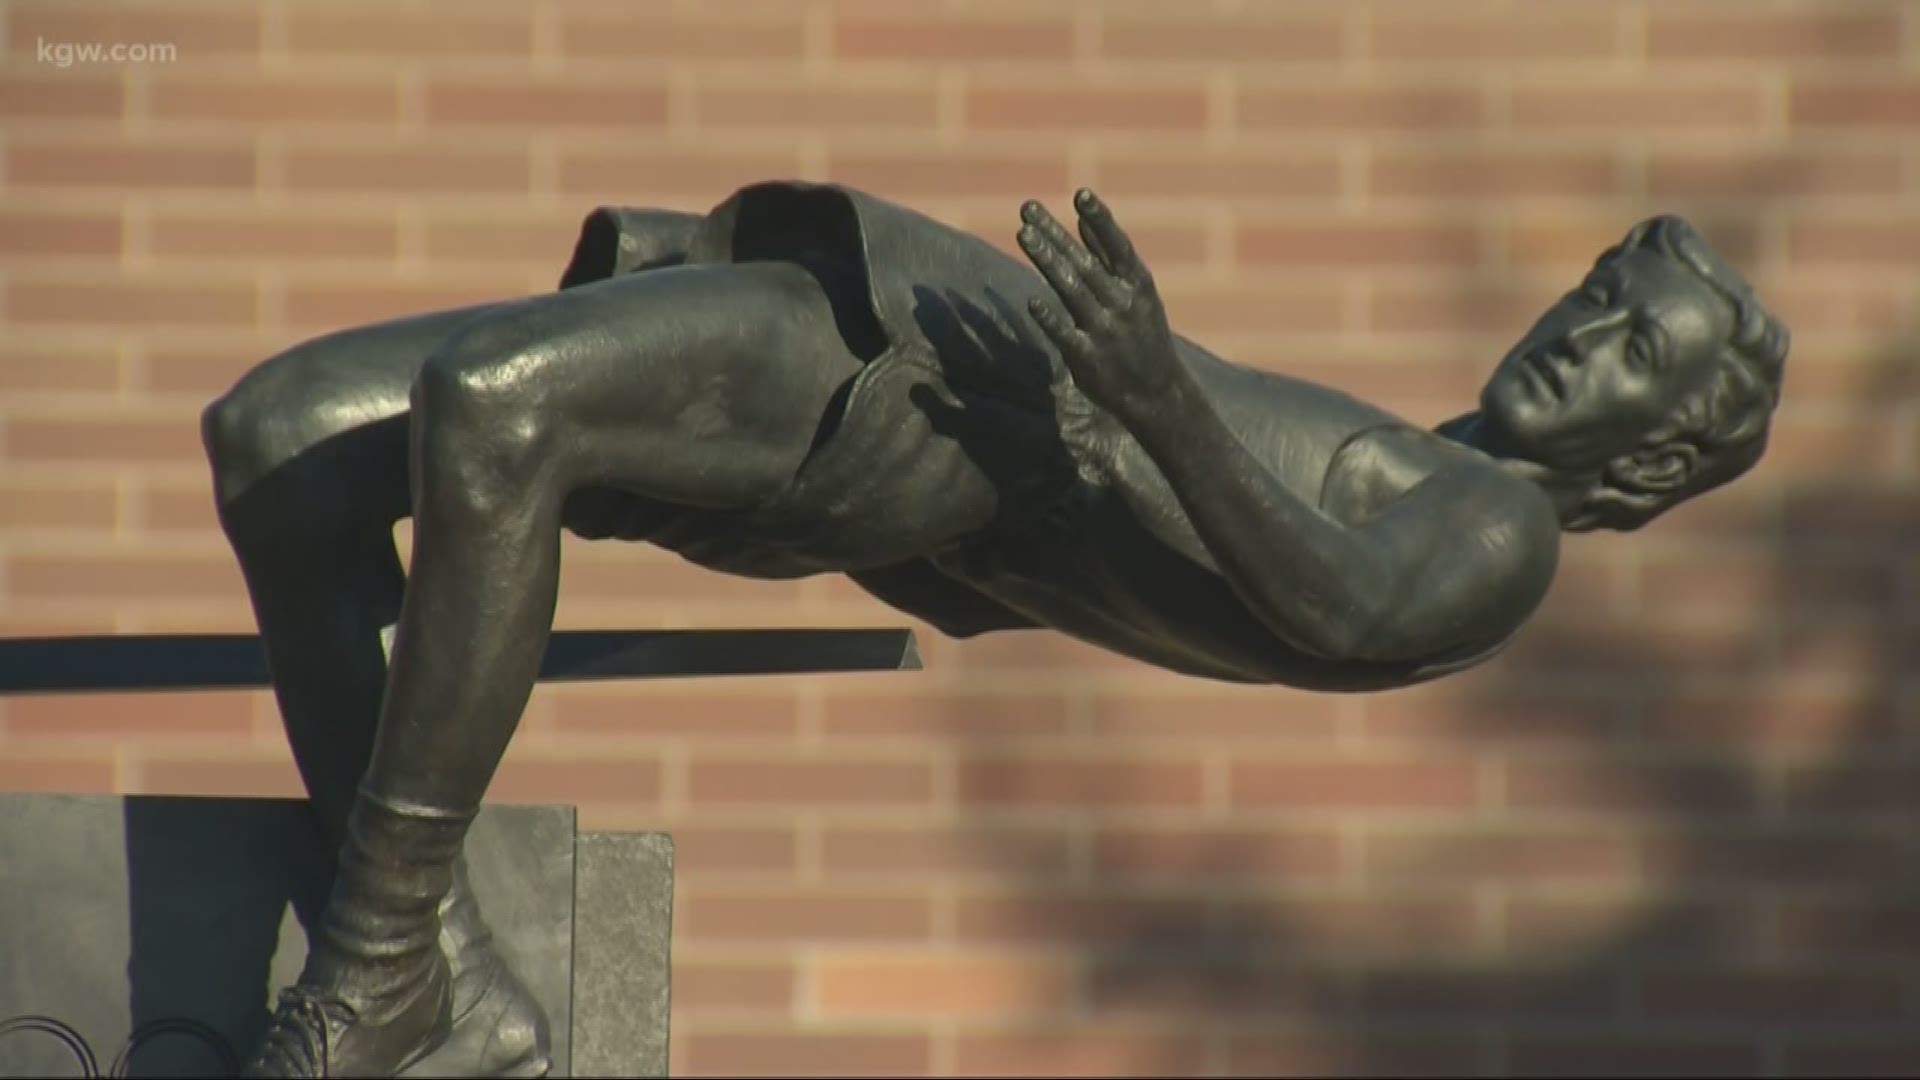 A new statue of the "Fosbury Flop" was unveiled at OSU.